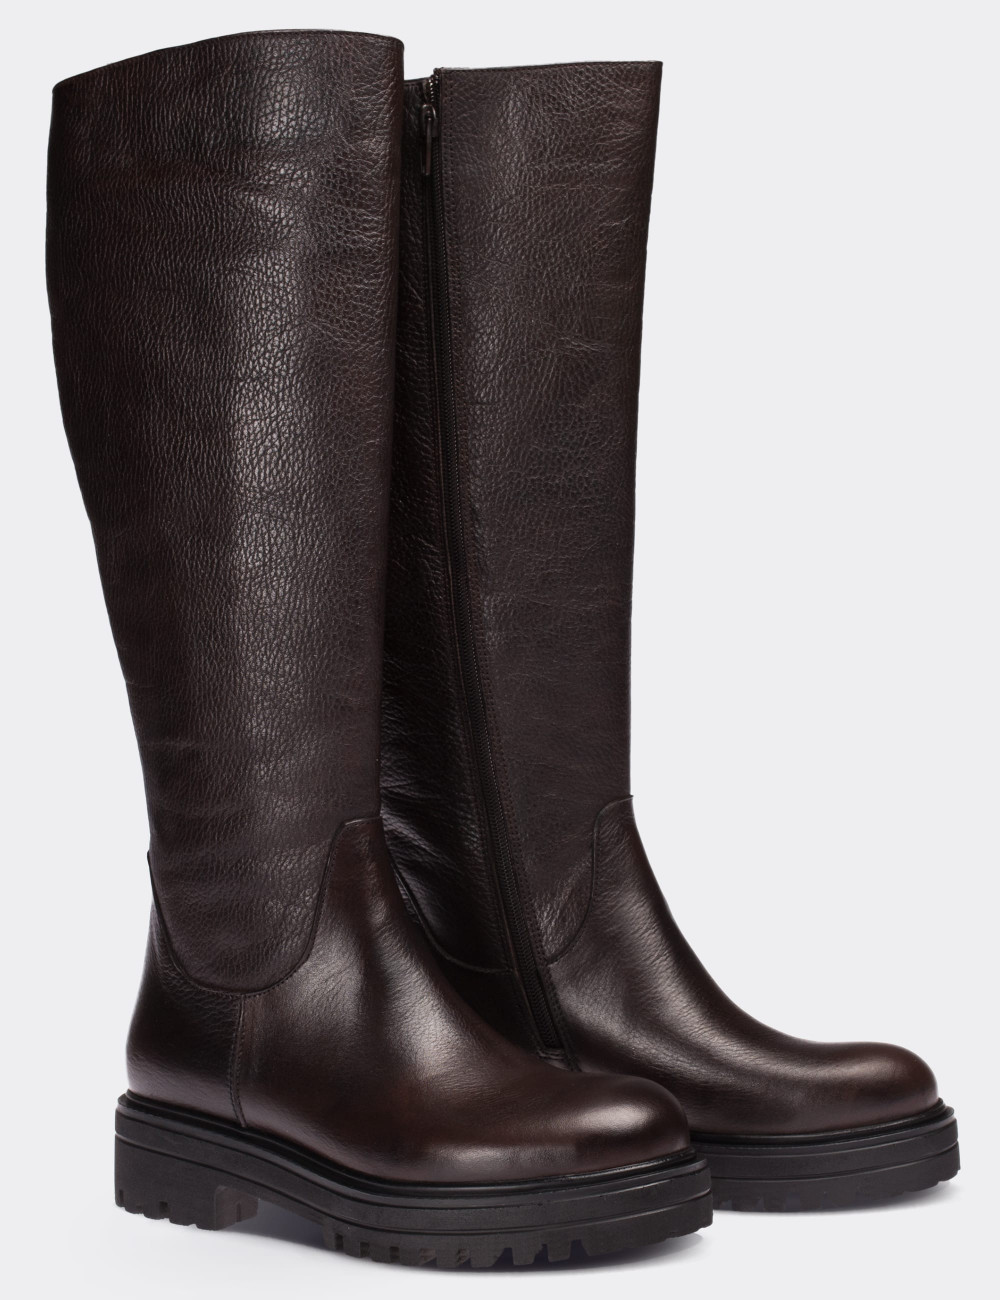 Brown  Leather  Boots - 01807ZKHVE01